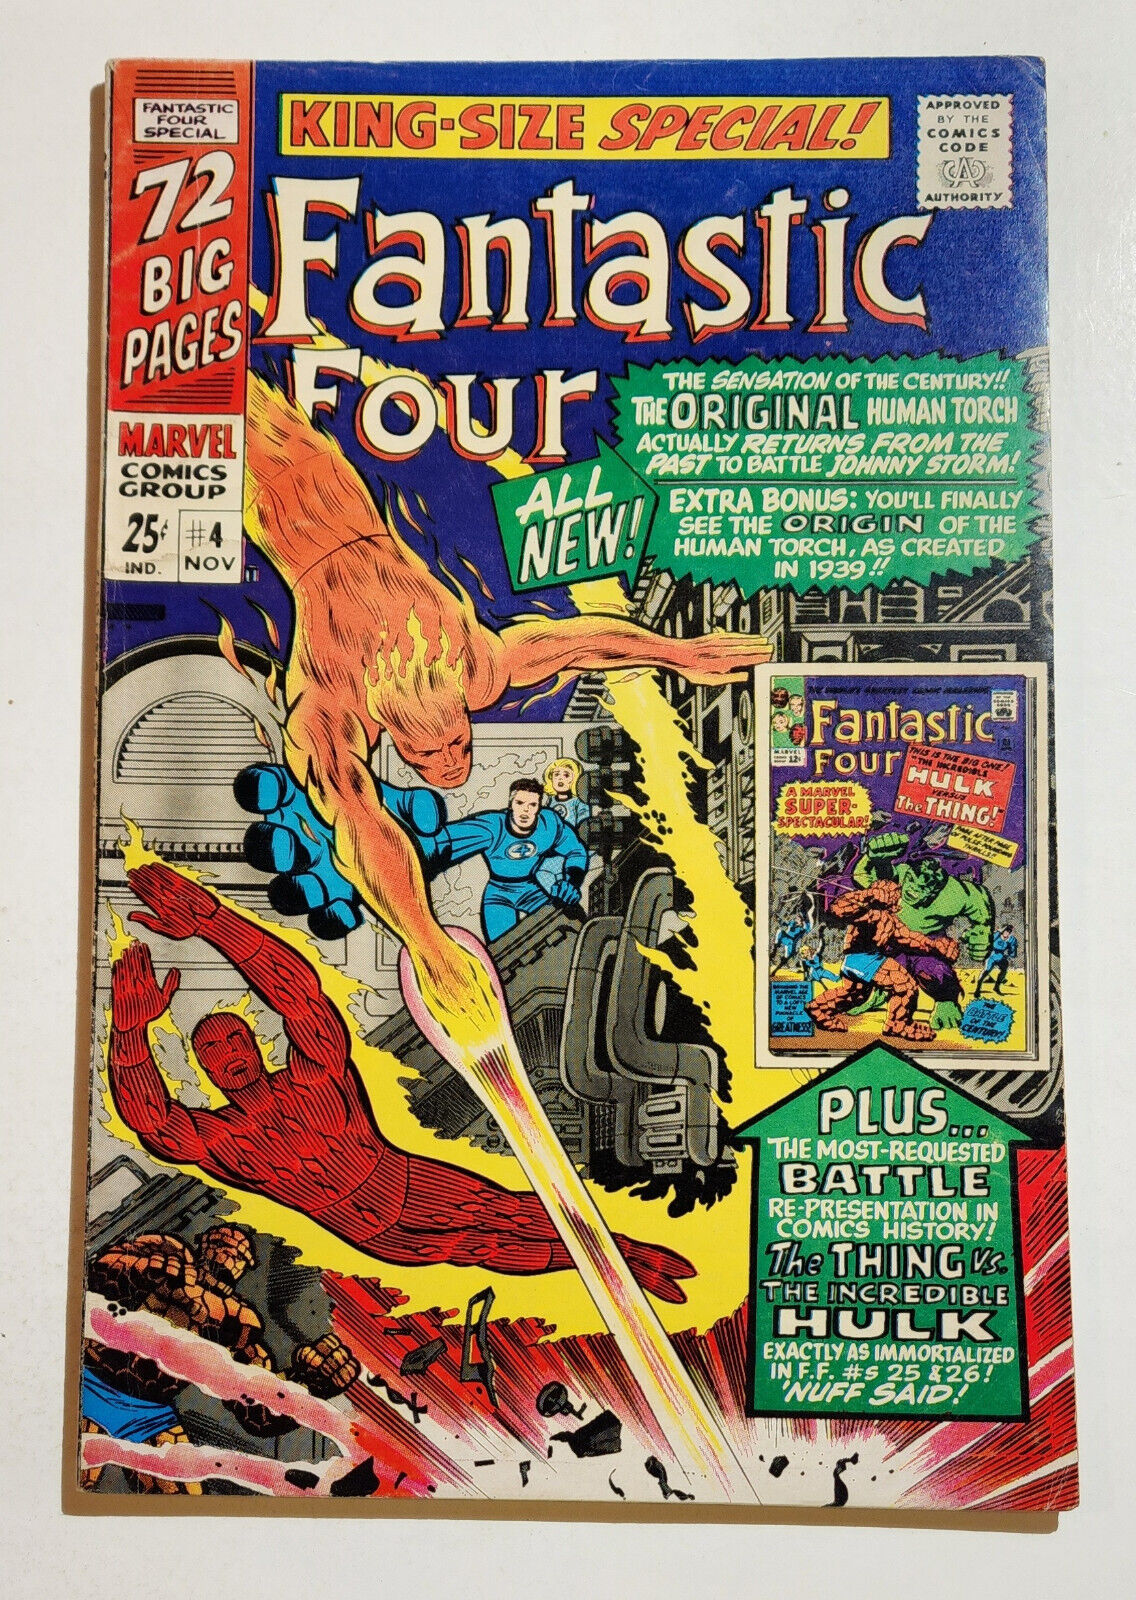 FANTASTIC FOUR KING-SIZE SPECIAL, ANNUAL #4 Jack Kirby, Stan Lee HULK vs THING